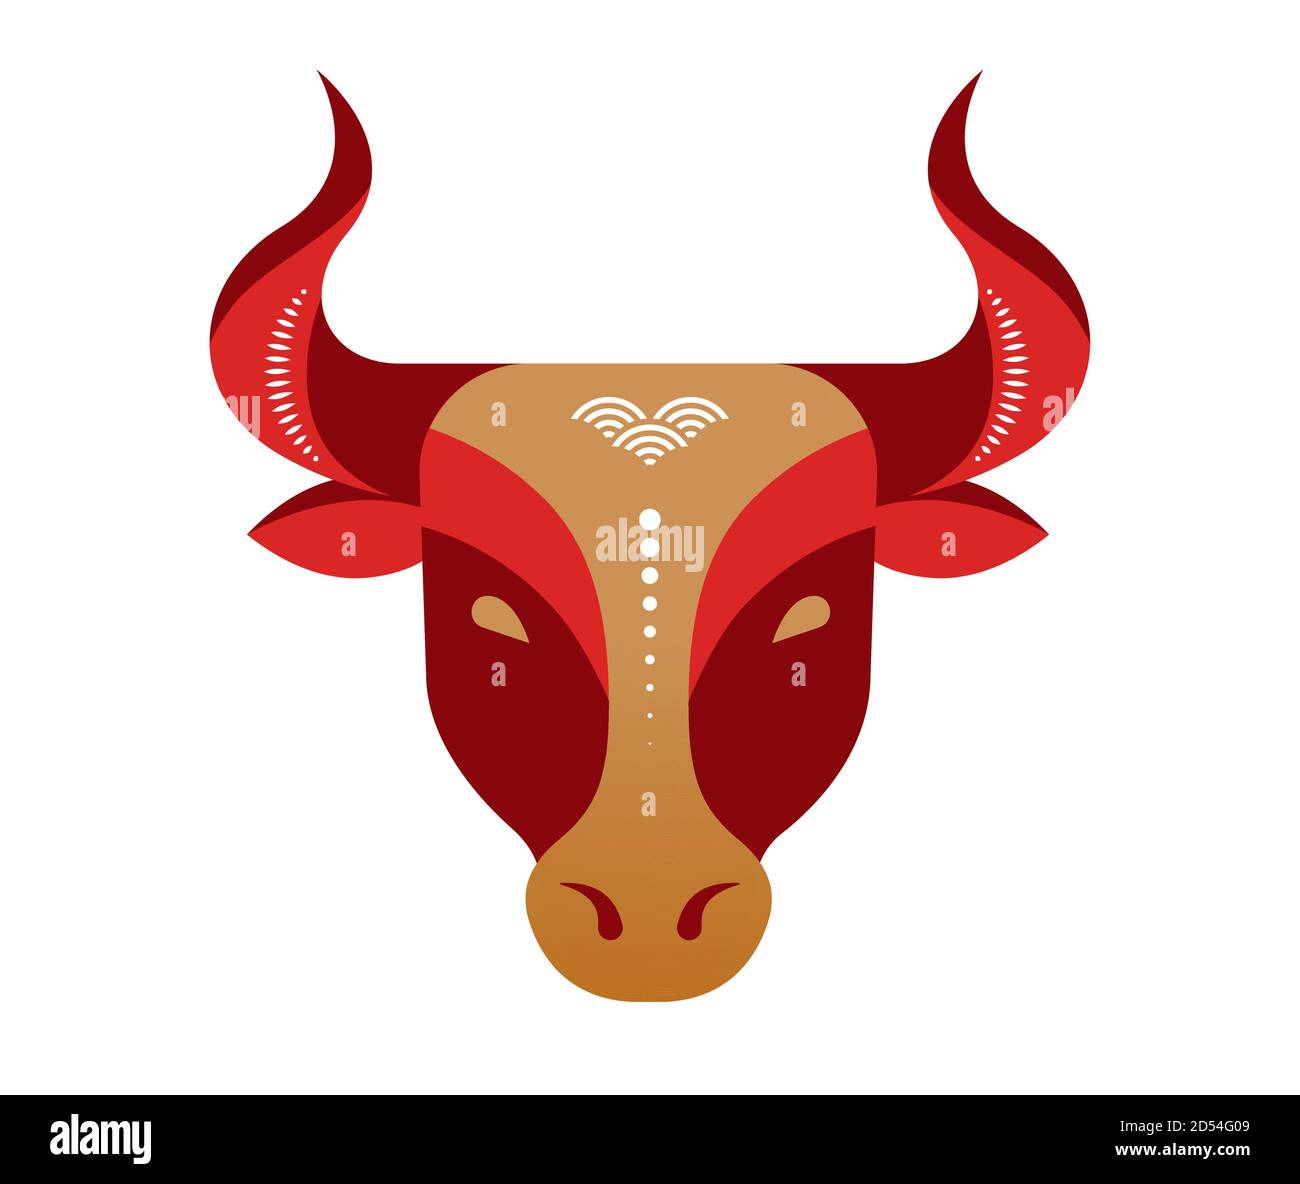 Chinese new year 2021 year of the ox, Chinese zodiac symbol Stock Vector